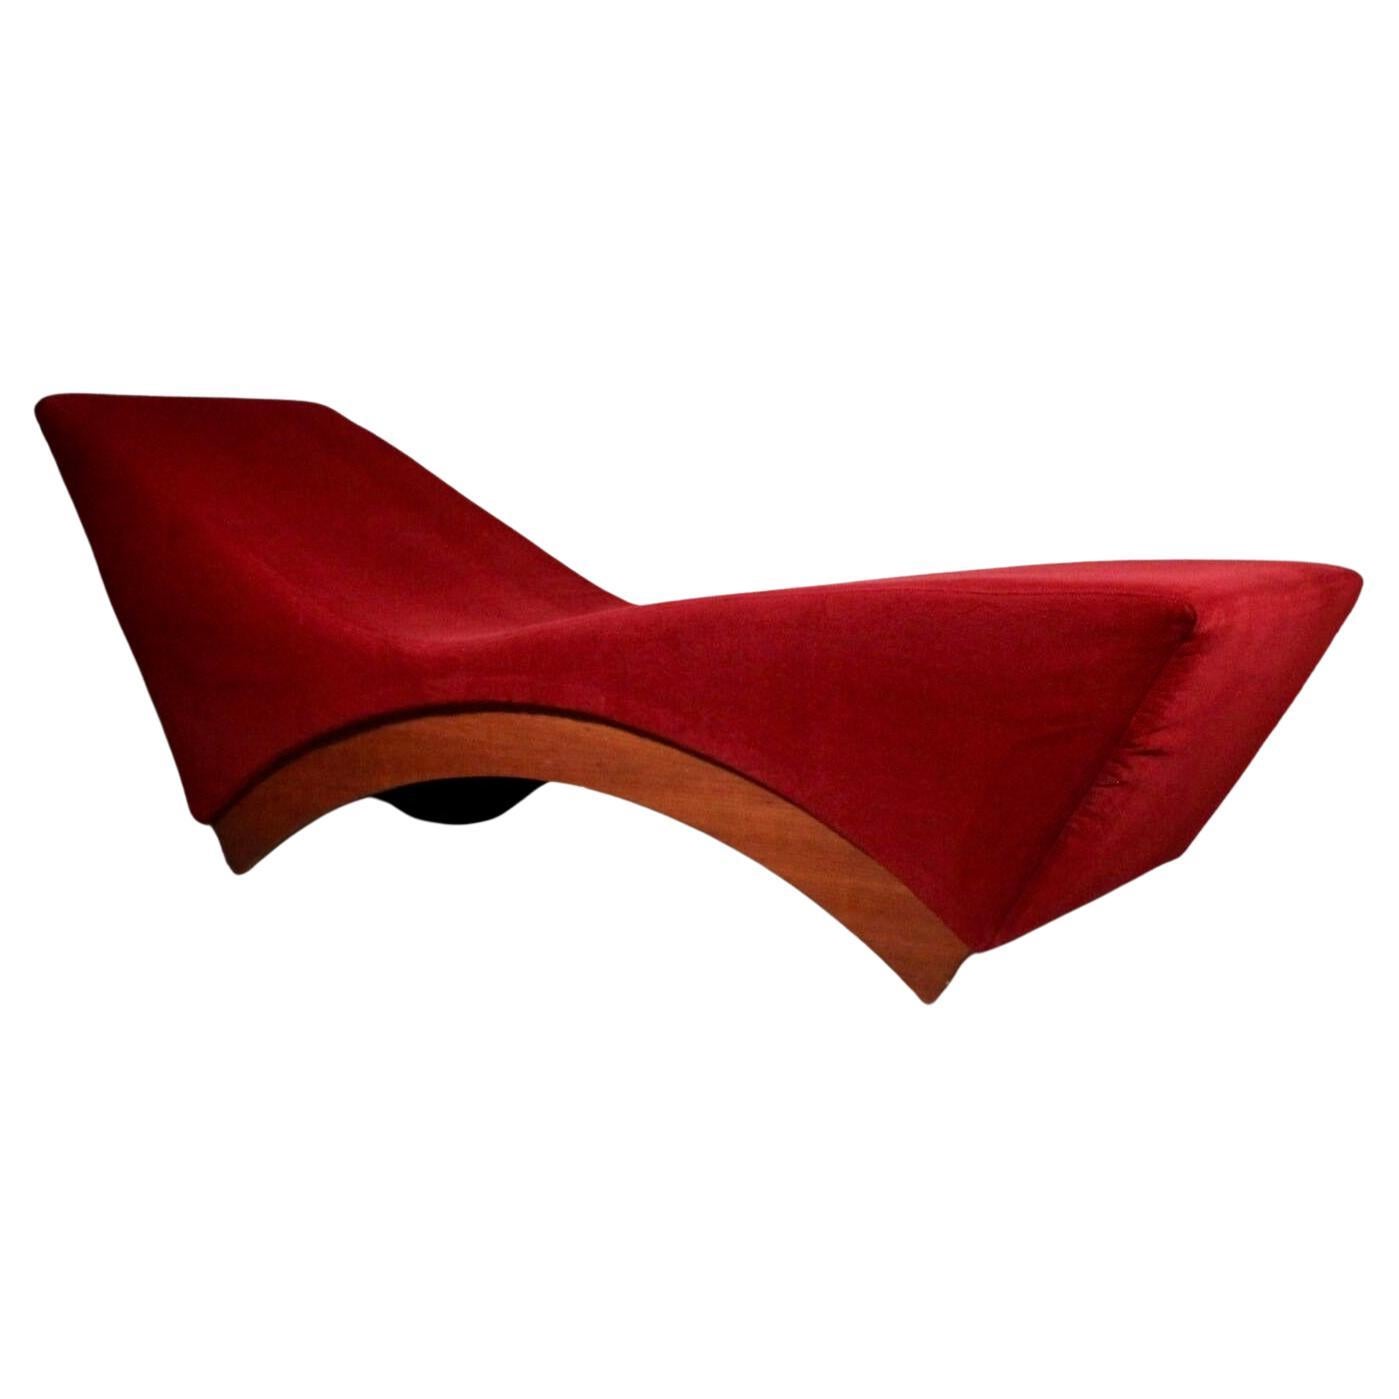 Red chaise longue, wood and fabric, 1970s